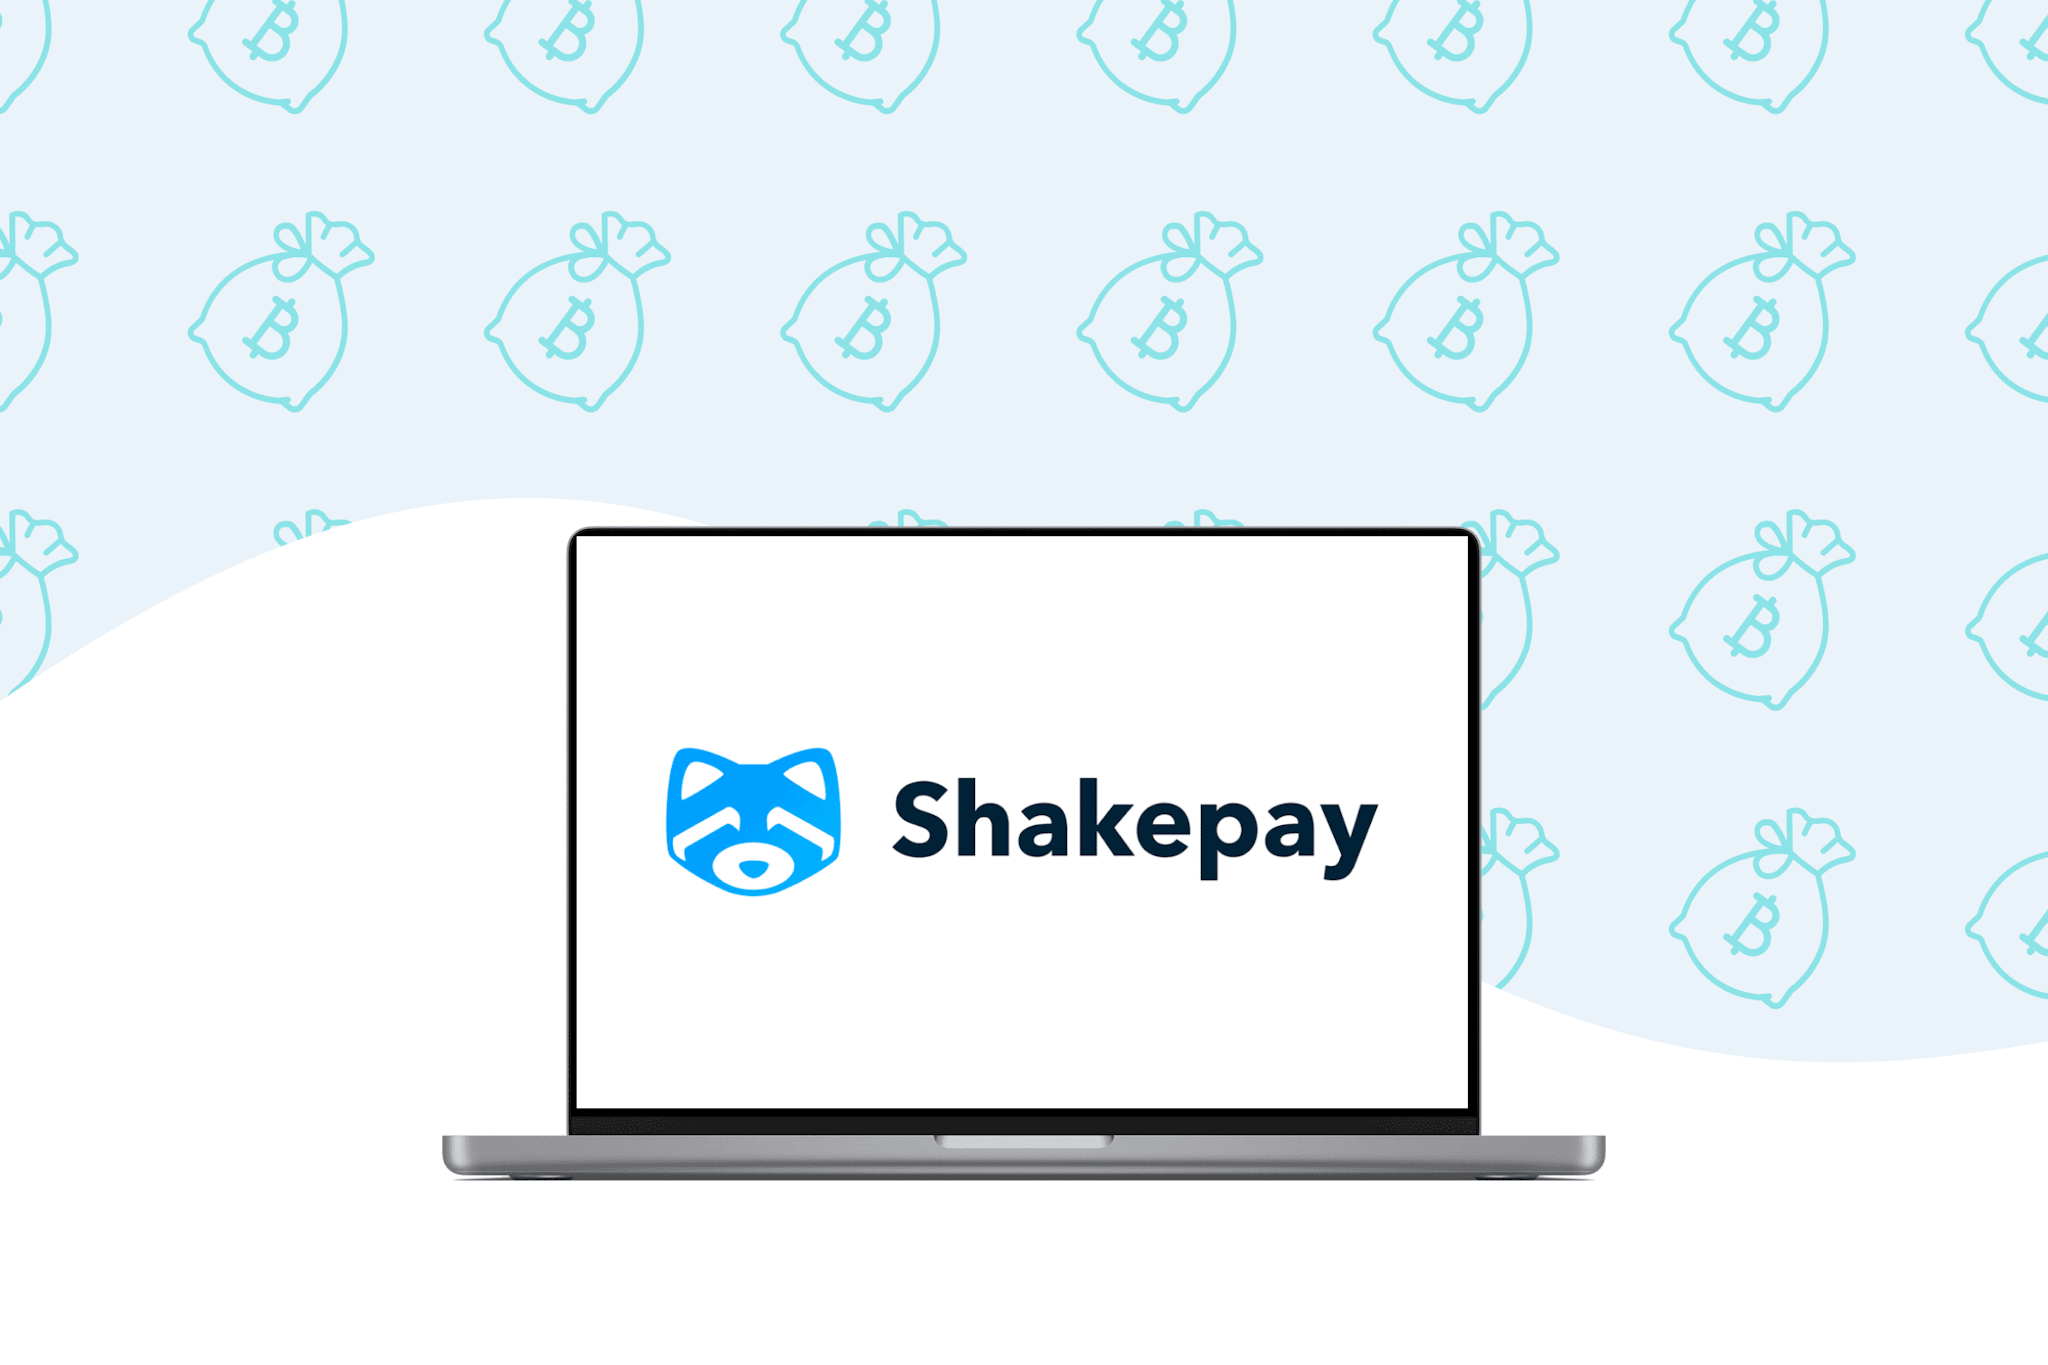 Shakepay Buy Bitcoin and Receive Free Satoshis on Your Phone